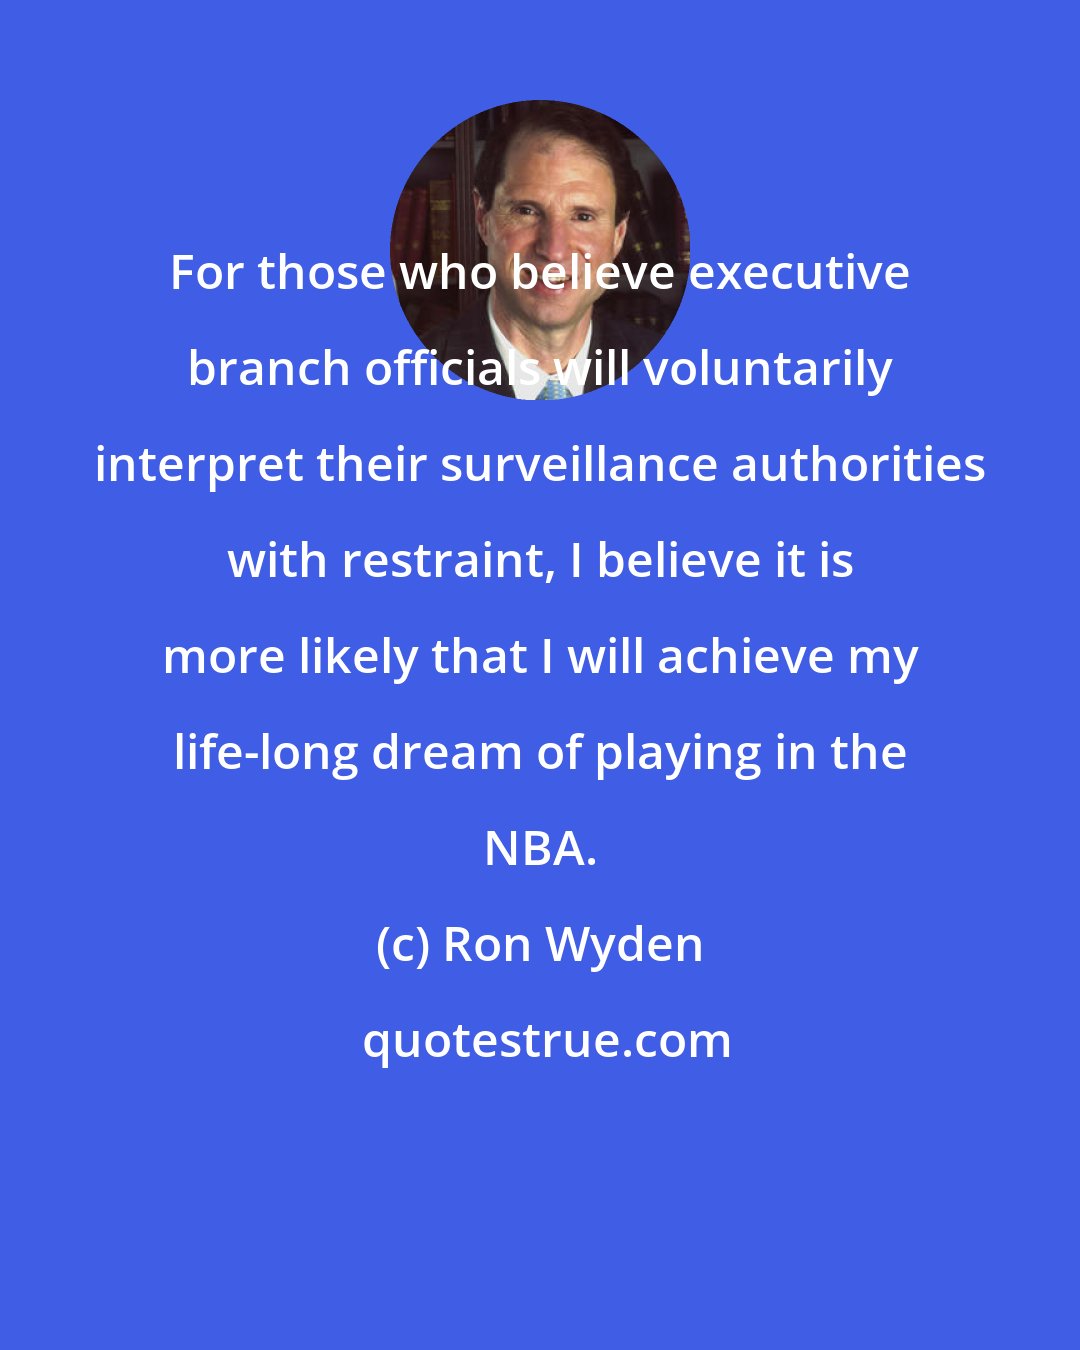 Ron Wyden: For those who believe executive branch officials will voluntarily interpret their surveillance authorities with restraint, I believe it is more likely that I will achieve my life-long dream of playing in the NBA.